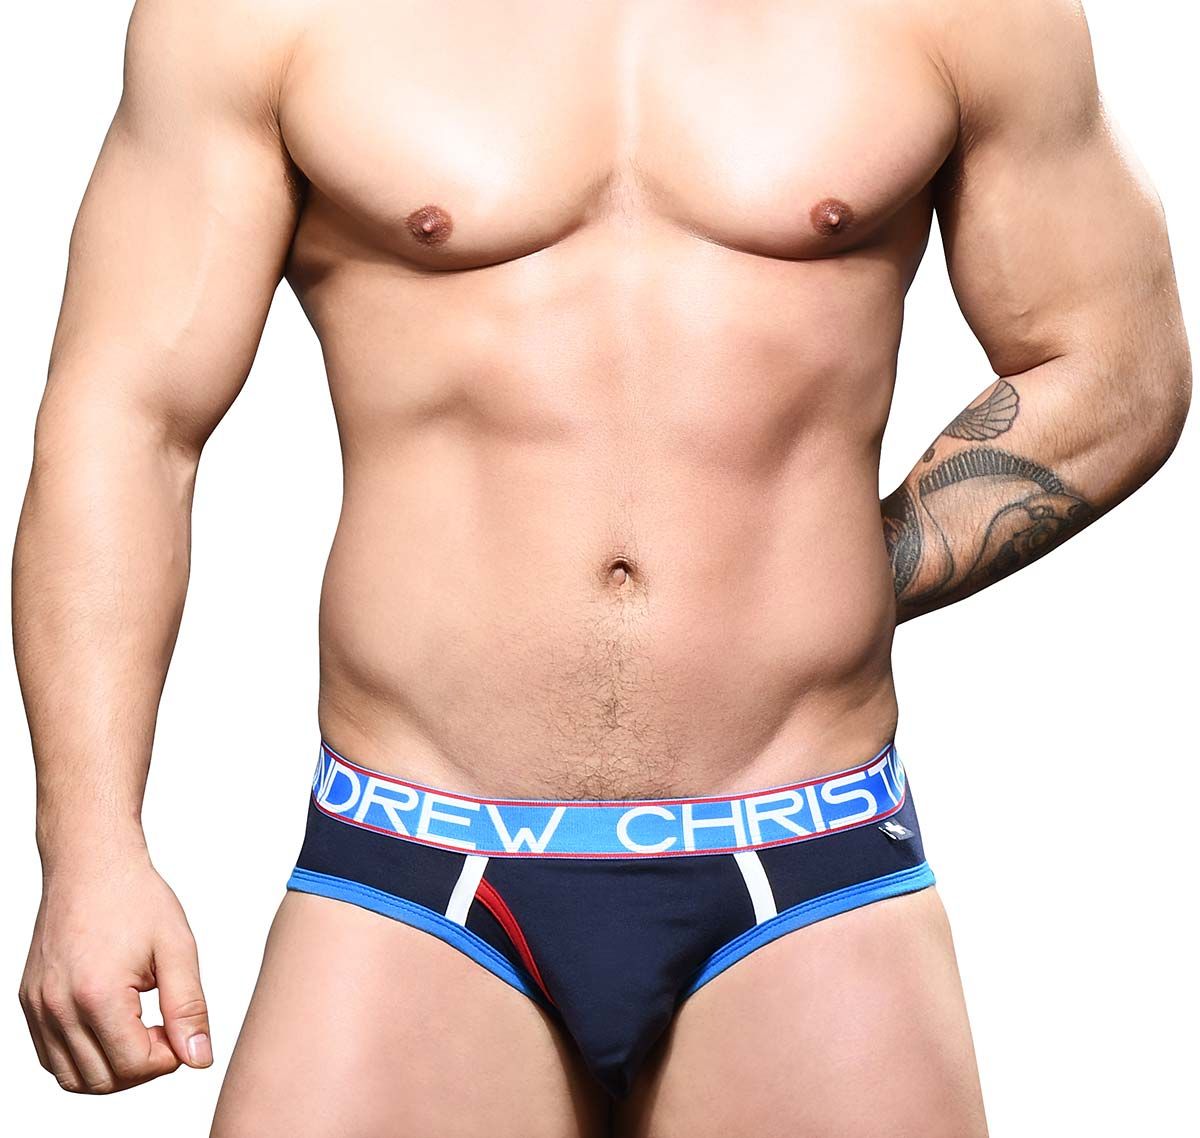 Andrew Christian Slip FLY TAGLESS BRIEF w/ ALMOST NAKED 92187, azul marino